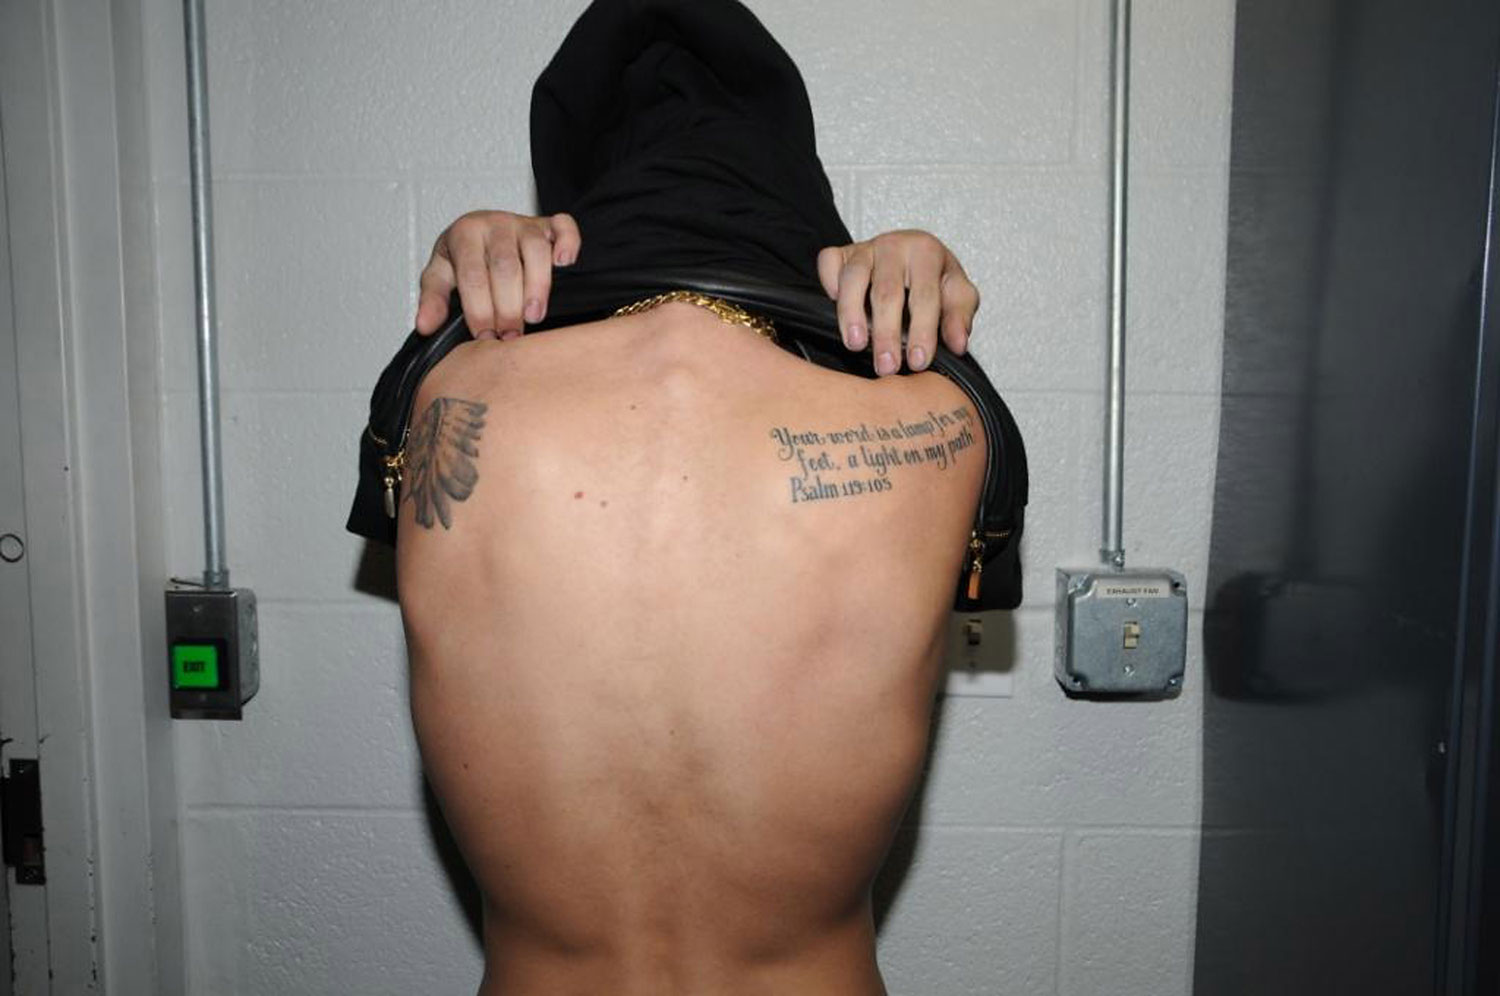 In this handout photo provided by the Miami Beach Police Department and released on March 4, 2014, singer Justin Bieber displays his tattoos for police documentation while in custody on January 23, 2014 in Miami Beach, Florida. (Handout—Getty Images)